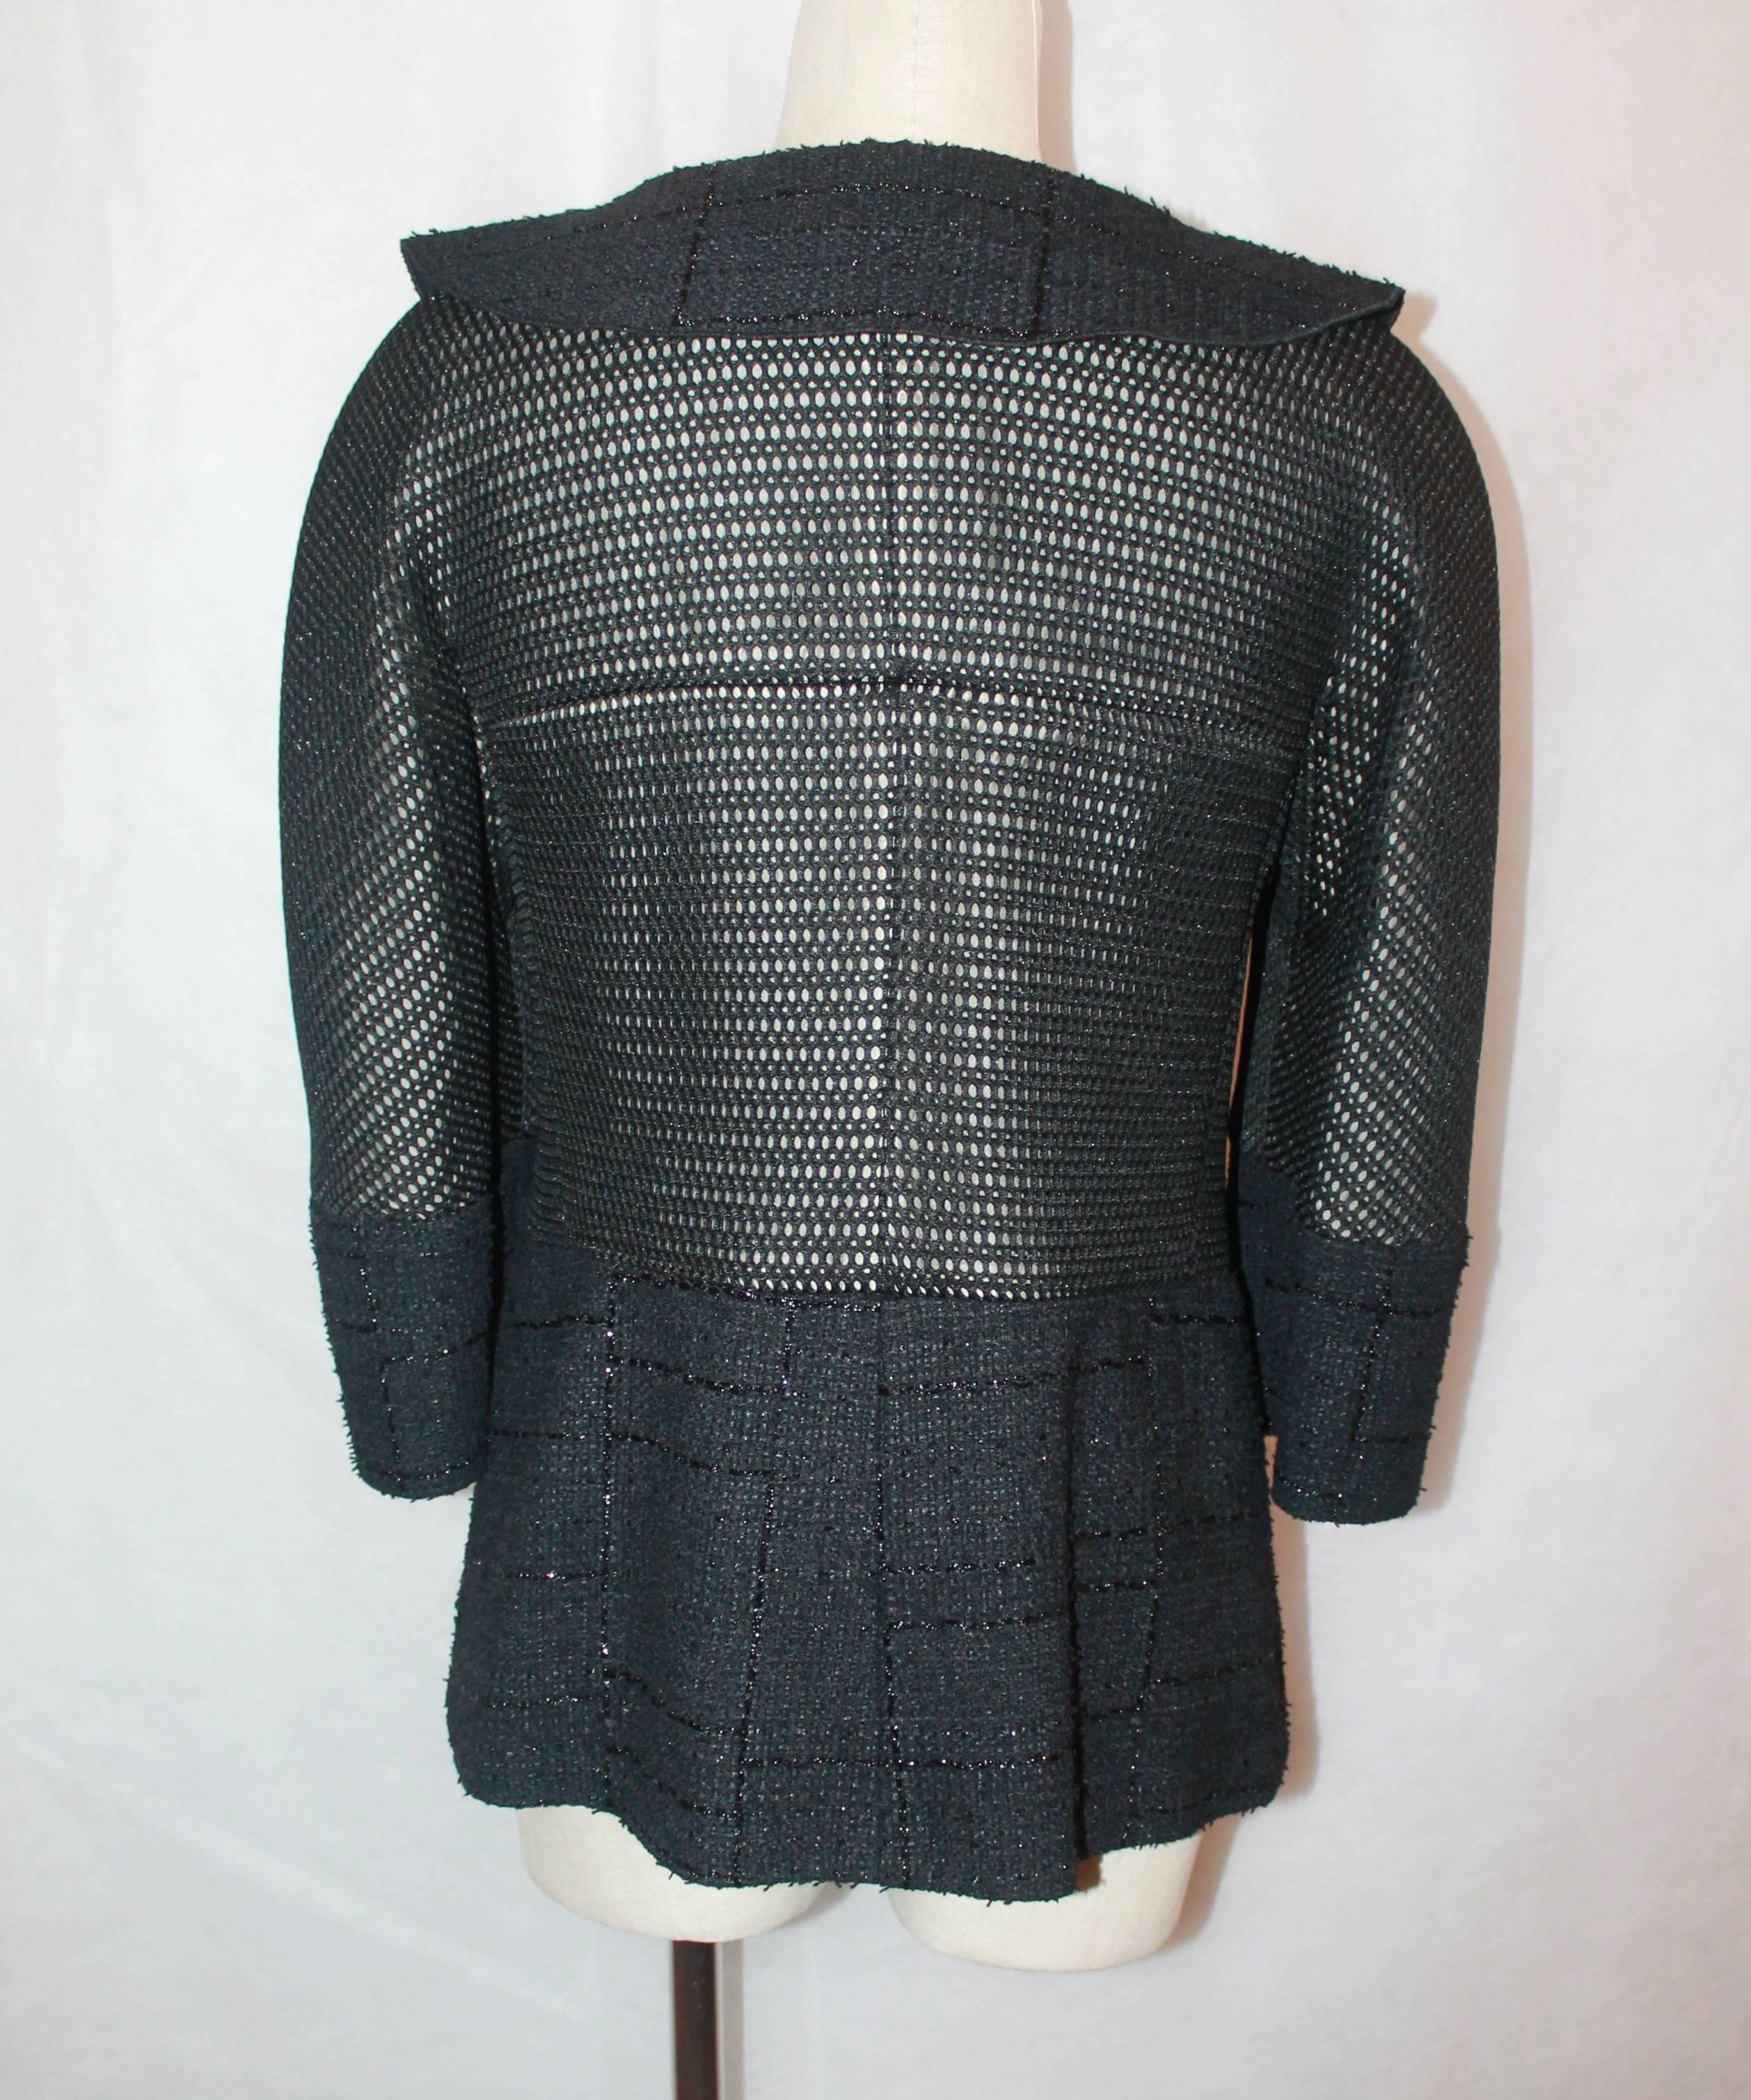 Women's Chanel Black Eyelet and Tweed Jacket with Pearl Buttons - 42